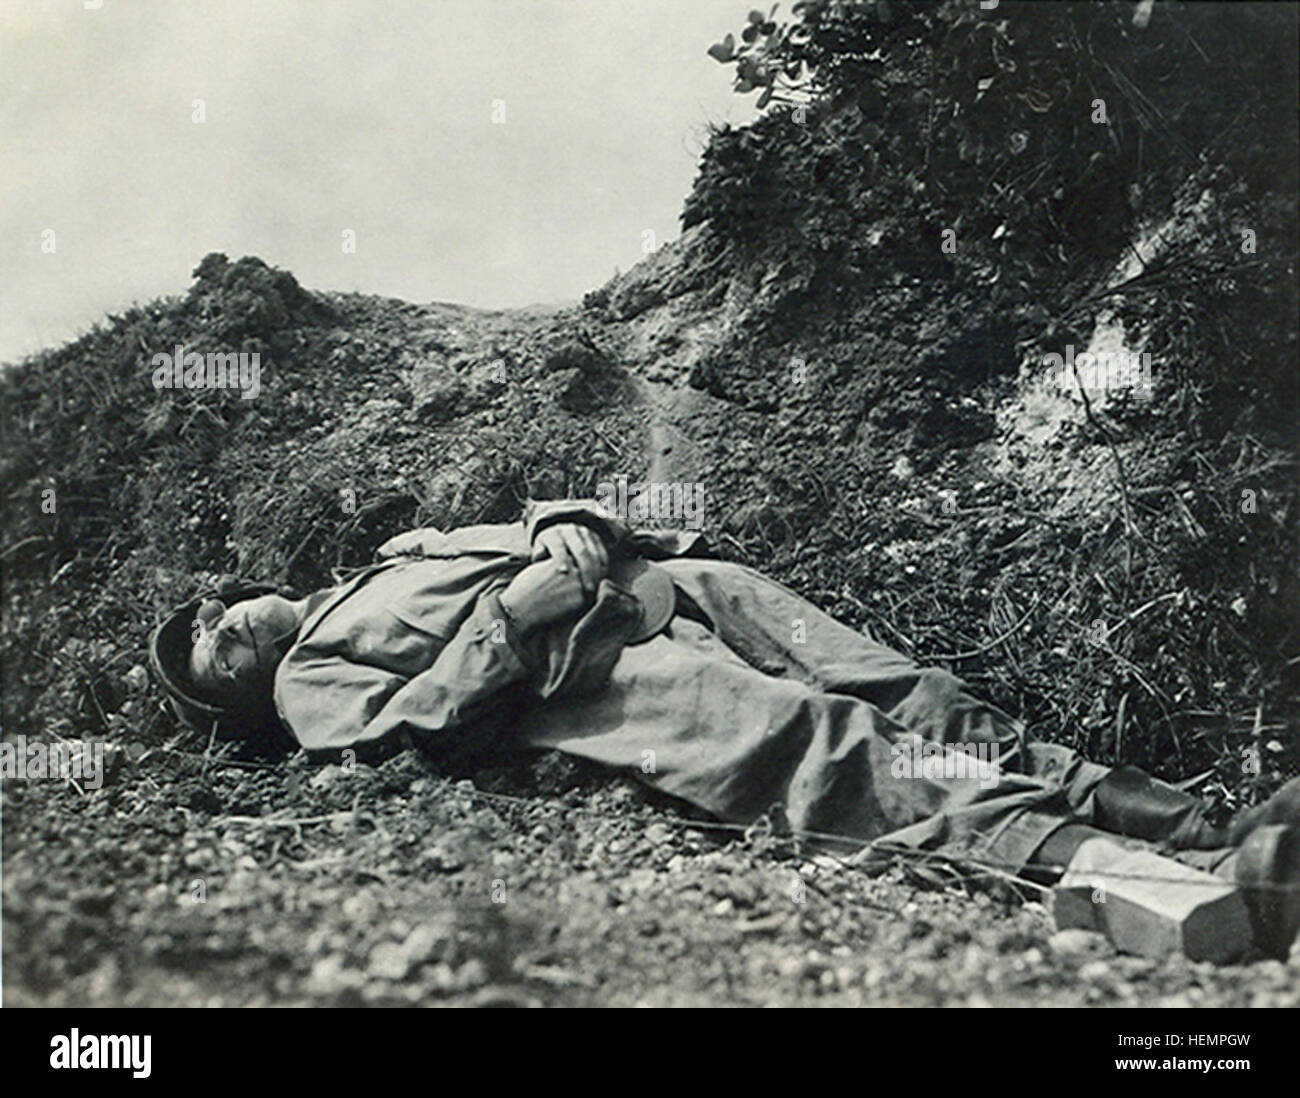 This photo provided by Richard Strasser, perhaps never before published, shows famed World War II war correspondent Ernie Pyle shortly after he was killed by a Japanese machine gun bullet on the island of Ie Shima on April 18, 1945. Pyle, 44, had just arrived in the Pacific after four years of writing his popular column from European battlefronts. The Army photographer who crawled forward under fire to make this picture later said it was withheld by military officials. An AP survey of history museums and archives found only a few copies in existence, and no trace of the original negative.  (AP Stock Photo